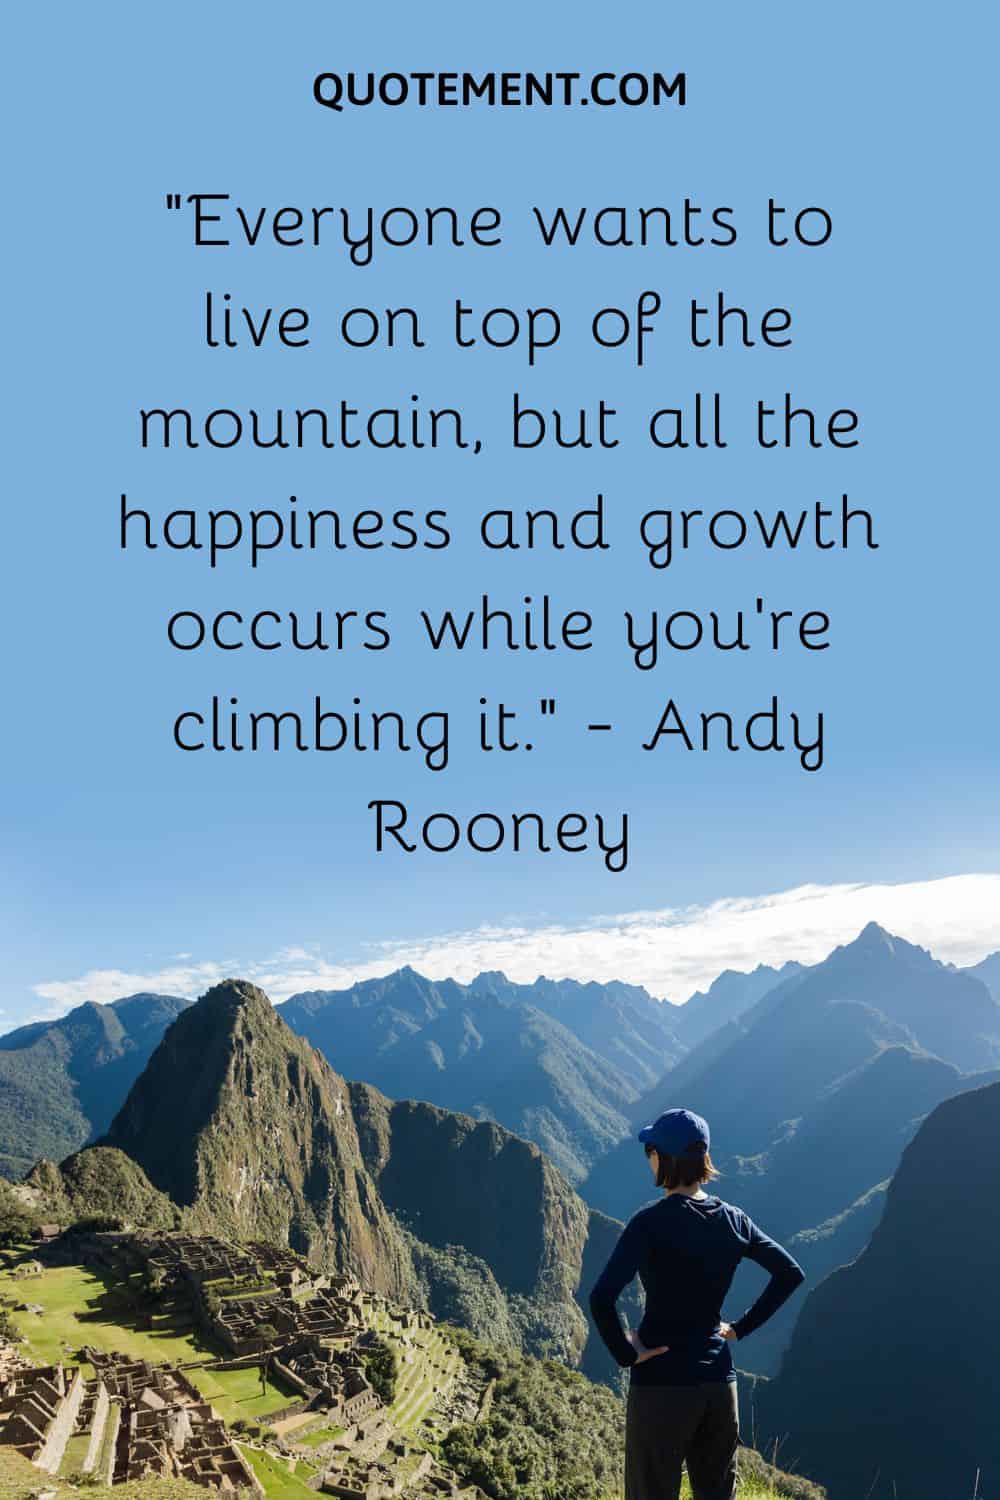 “Everyone wants to live on top of the mountain, but all the happiness and growth occurs while you’re climbing it.” — Andy Rooney